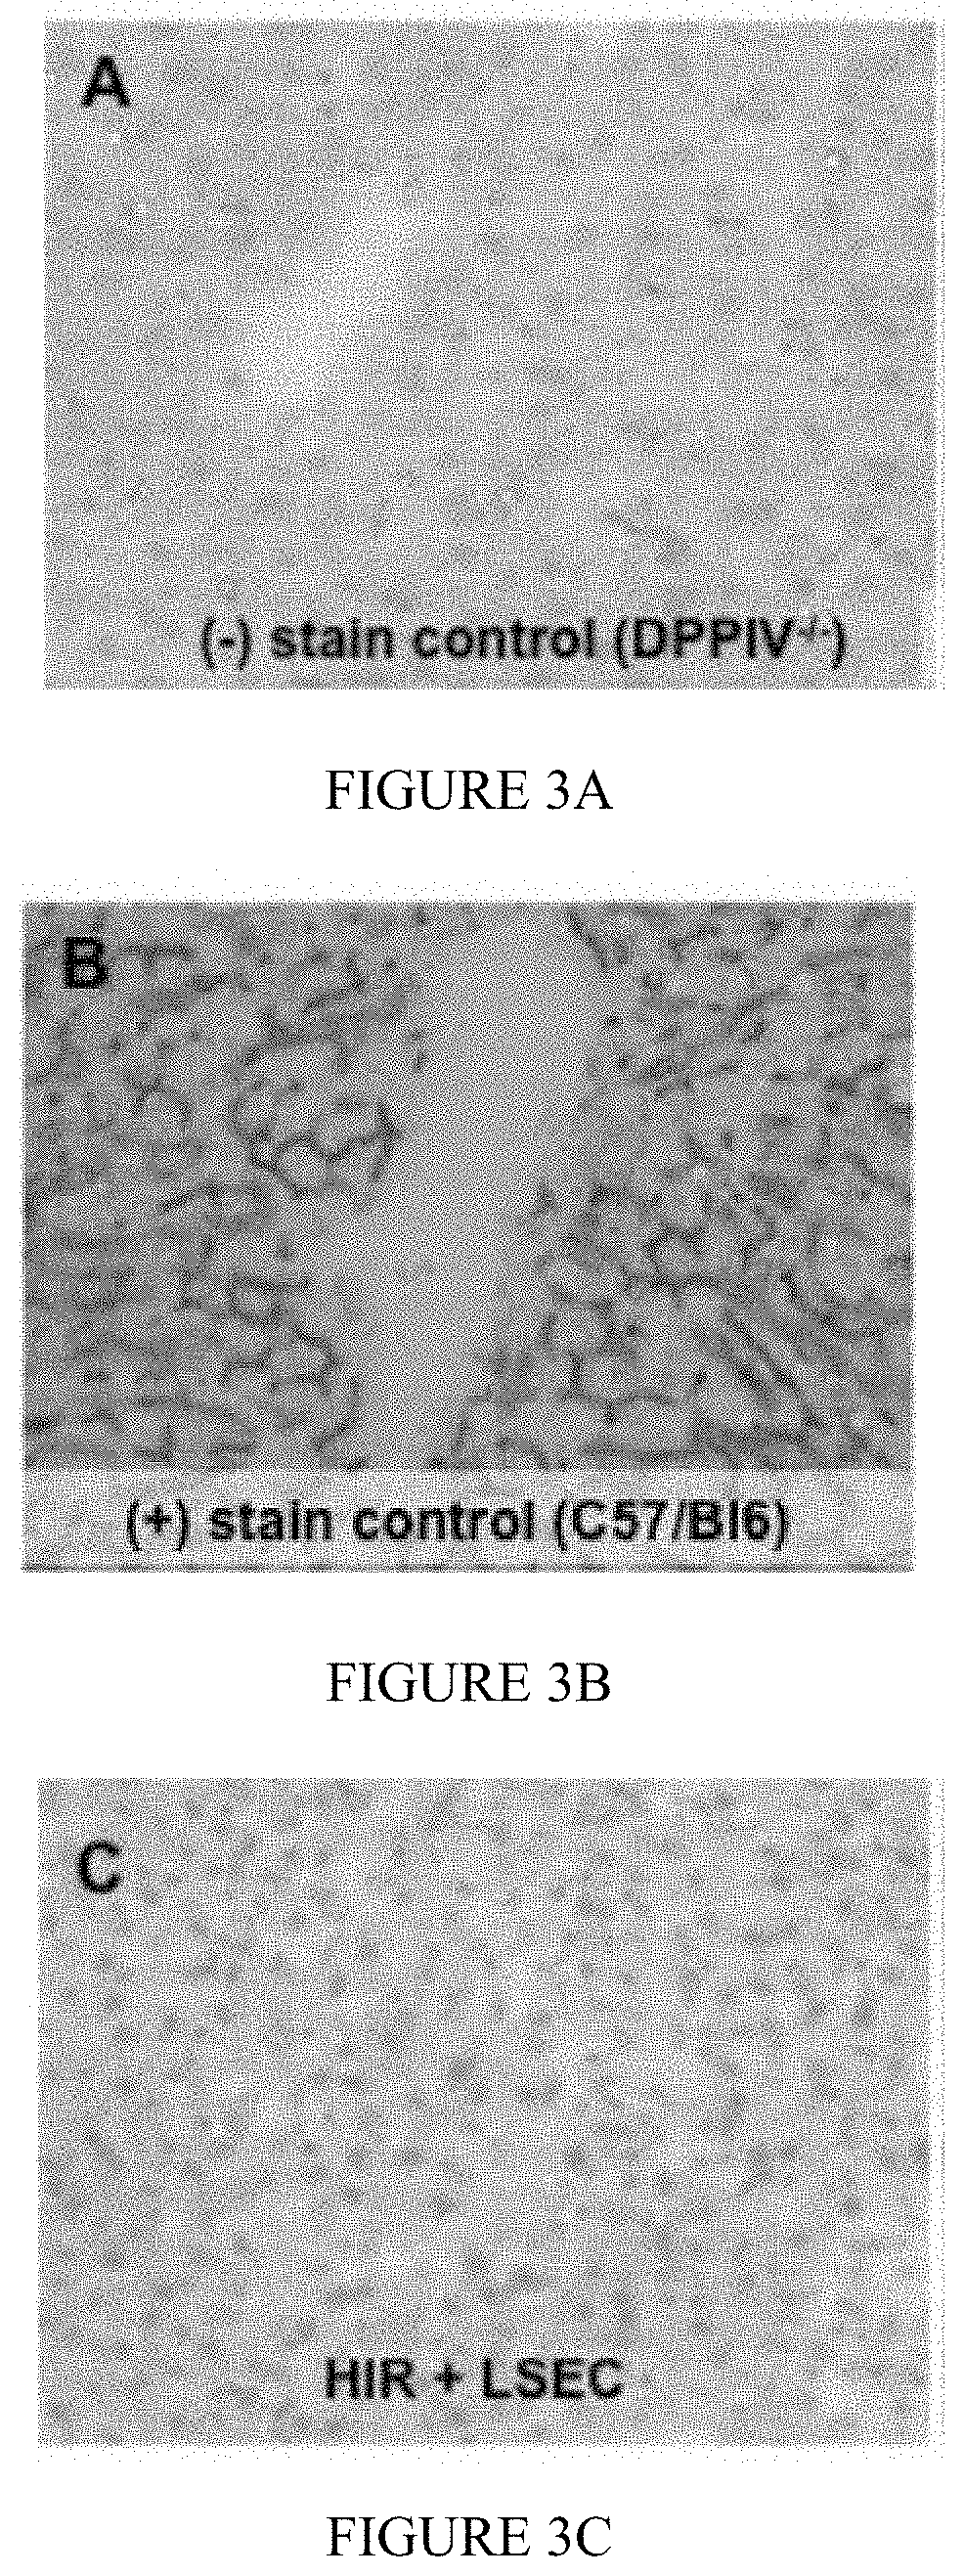 Methods for mitigating liver injury and promoting liver hypertrophy, regeneration and cell engraftment in conjunction with radiation and/or radiomimetic treatments